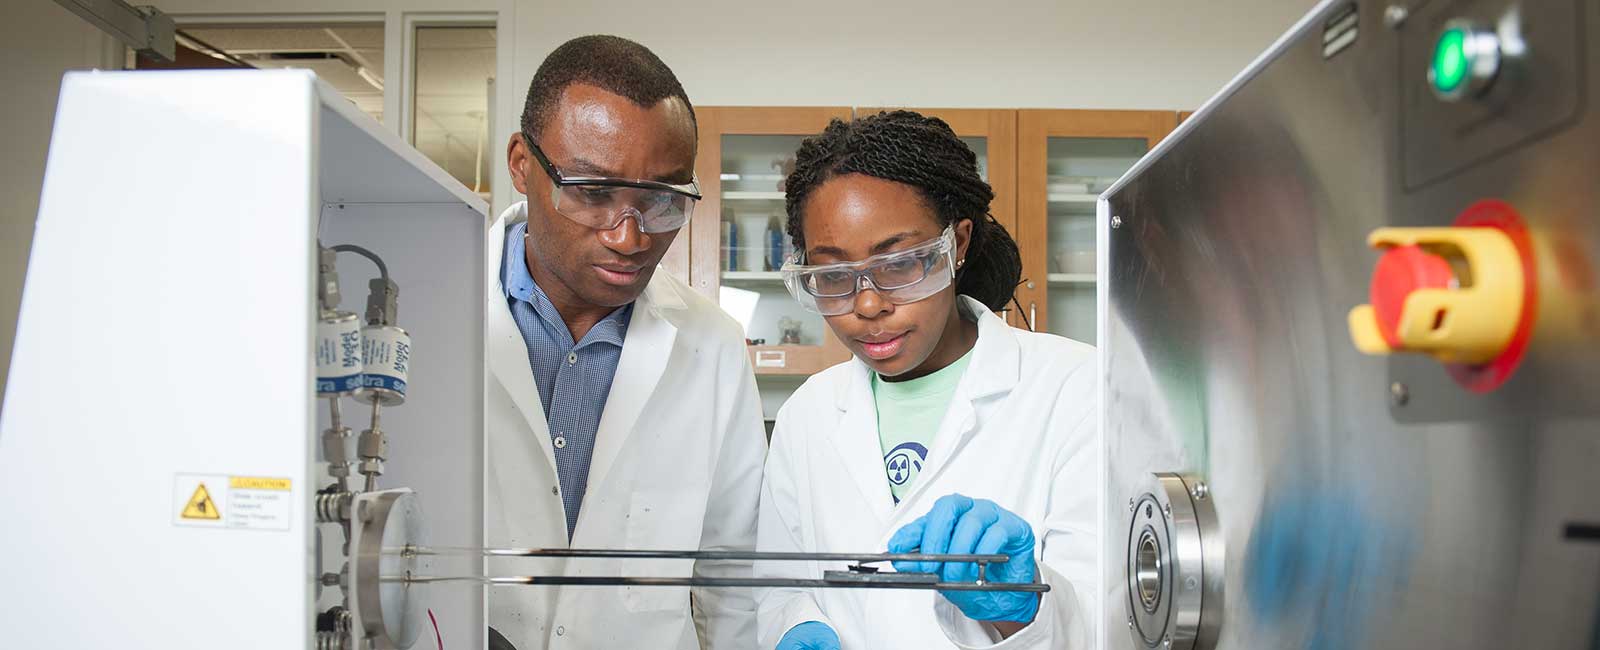 Faculty member observing a student working in a lab